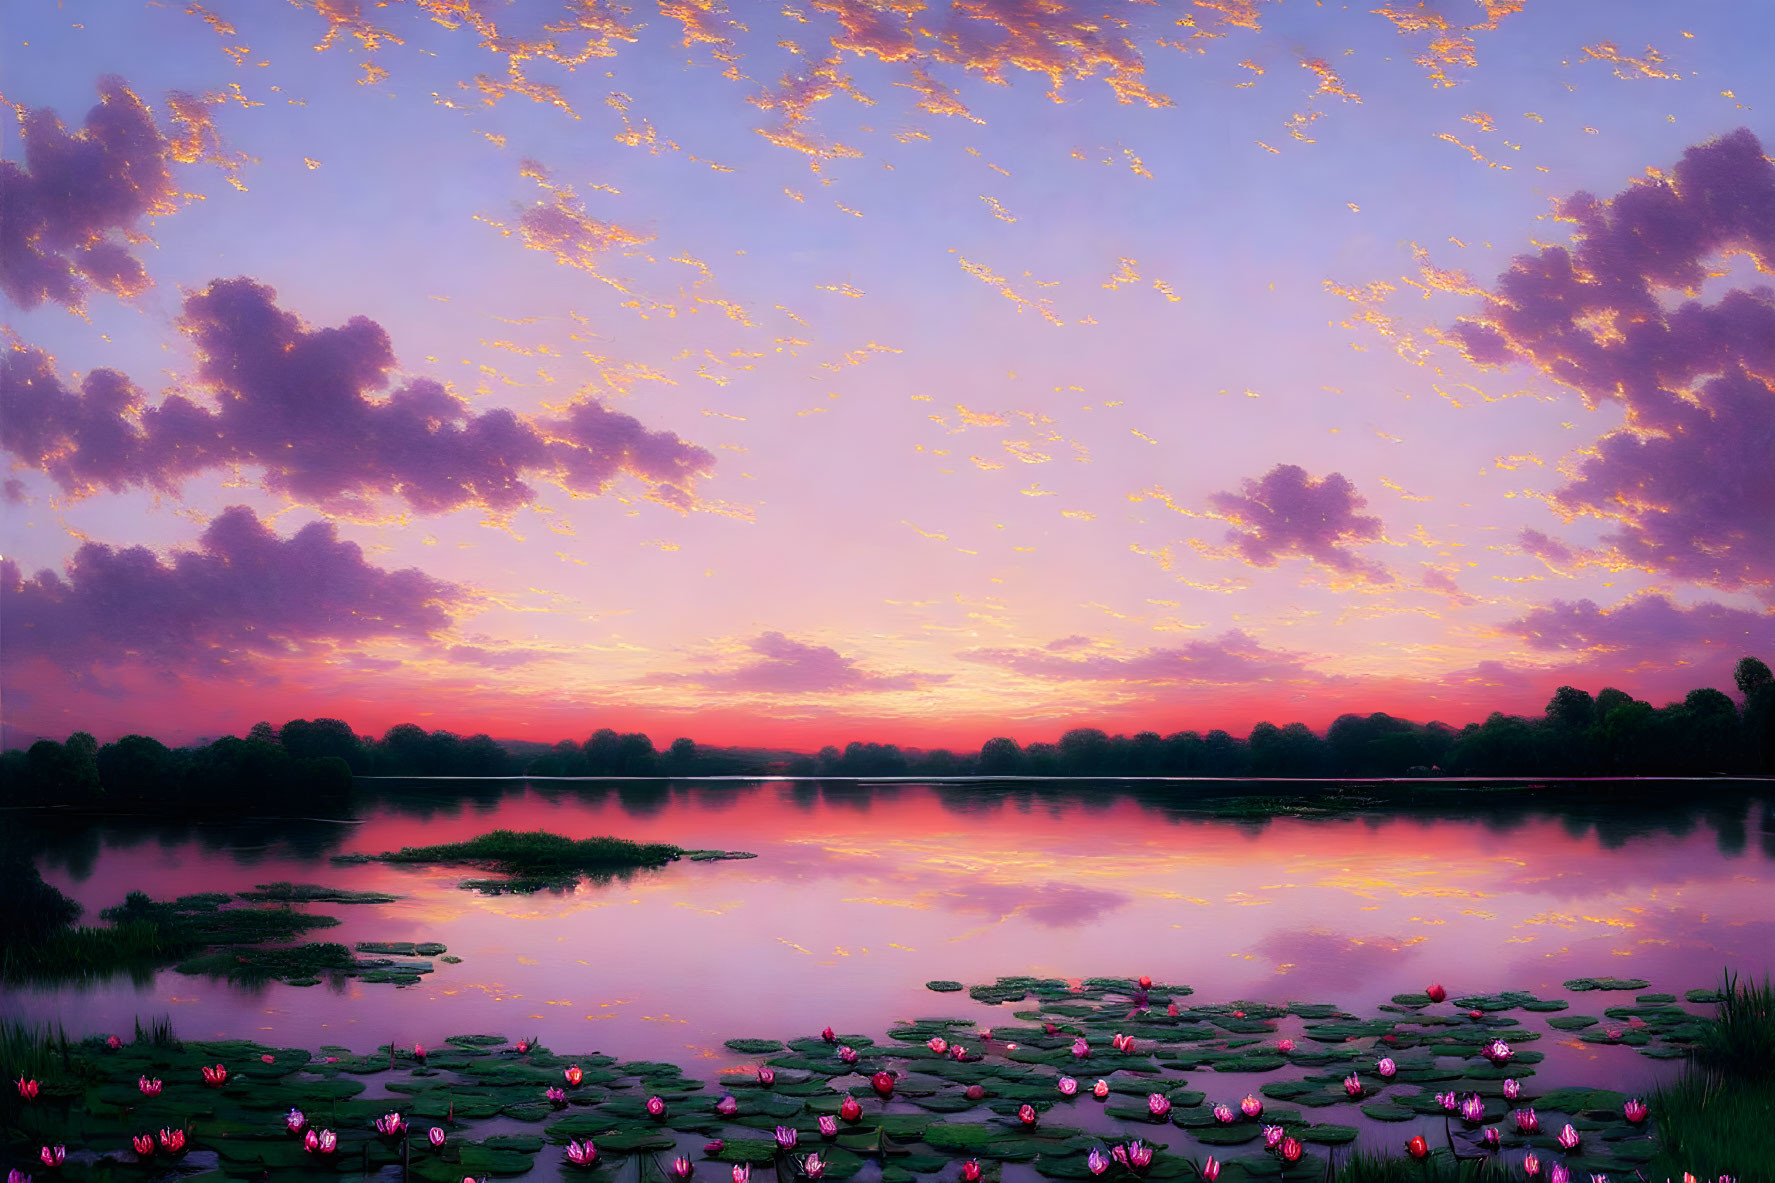 Tranquil lake with blooming pink lotus flowers under vibrant sunset sky